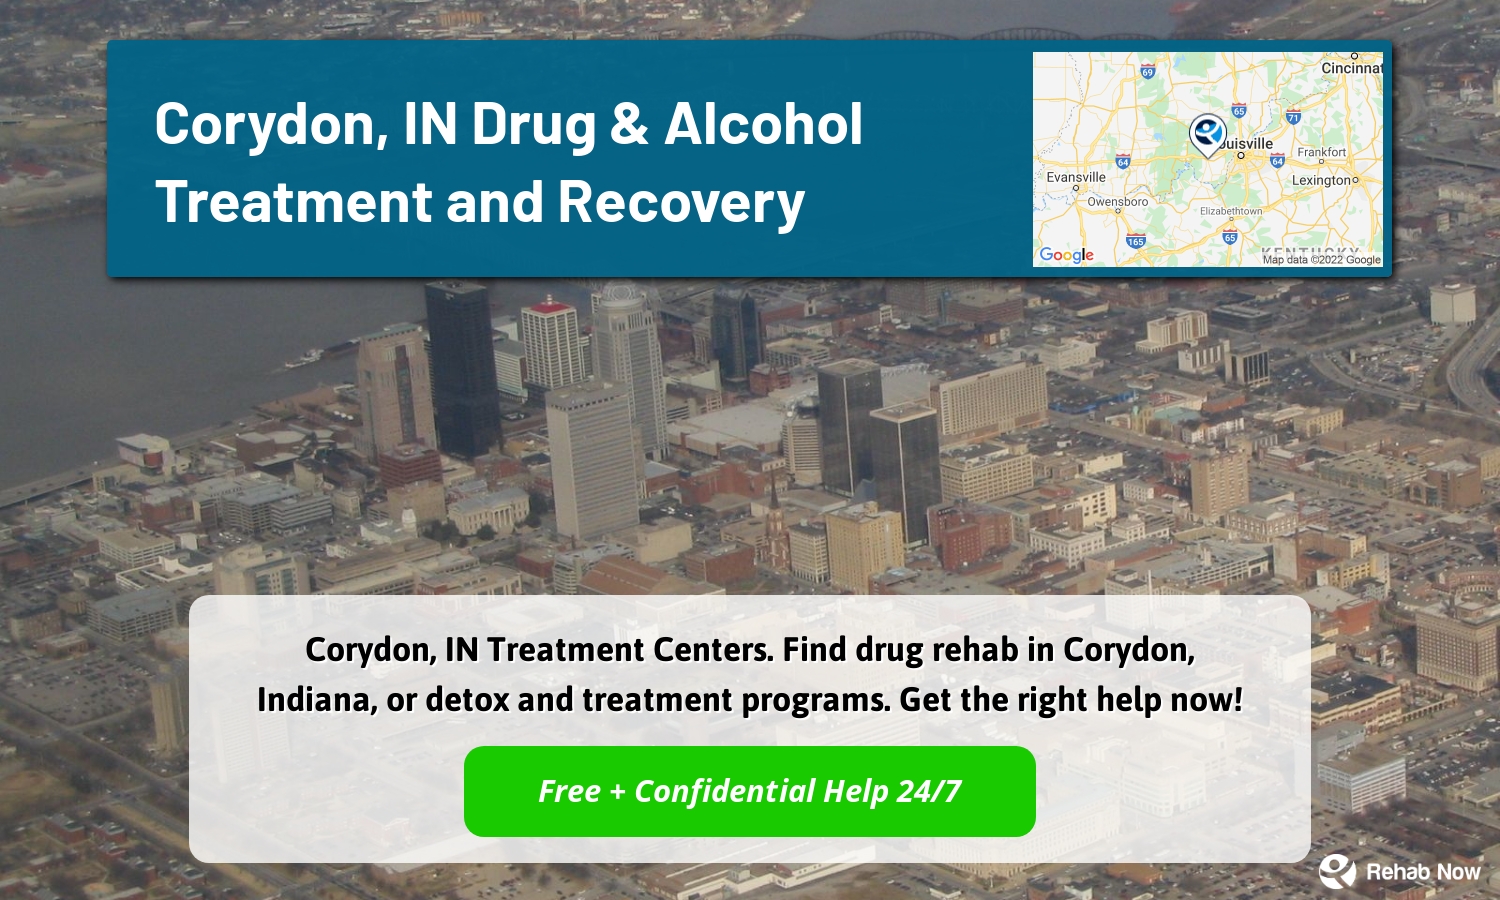 Corydon, IN Treatment Centers. Find drug rehab in Corydon, Indiana, or detox and treatment programs. Get the right help now!